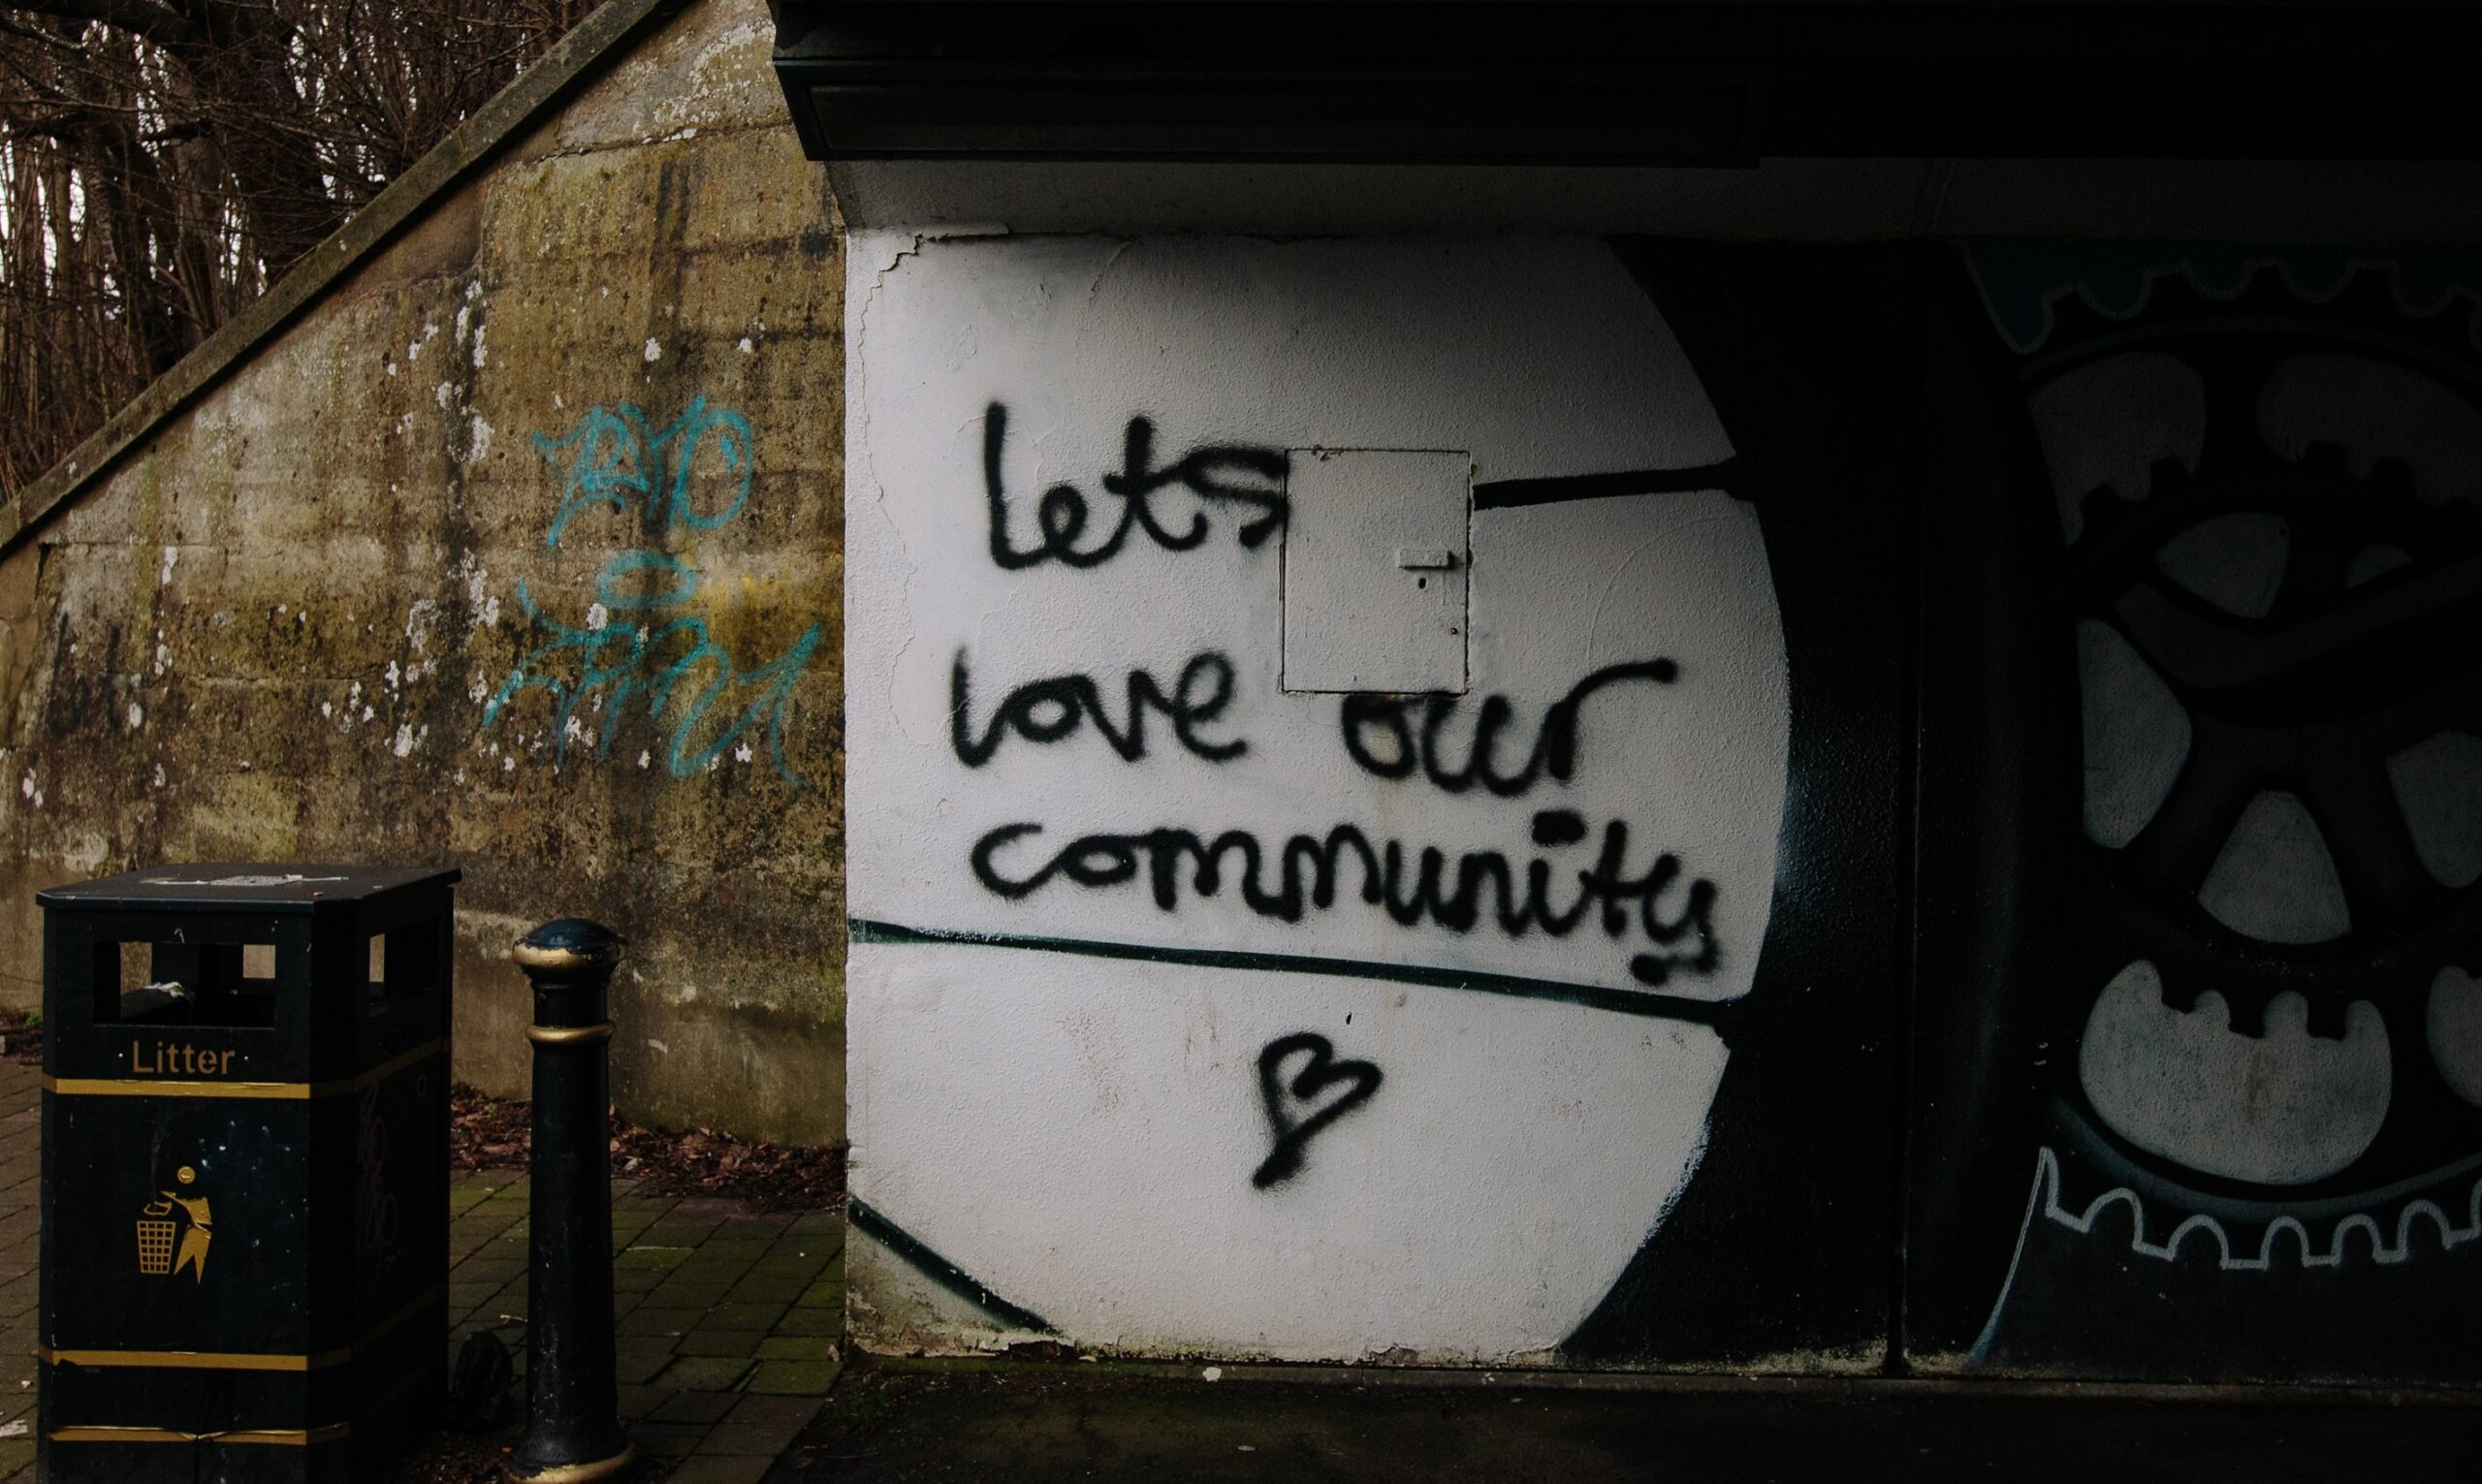 lets love community cropped